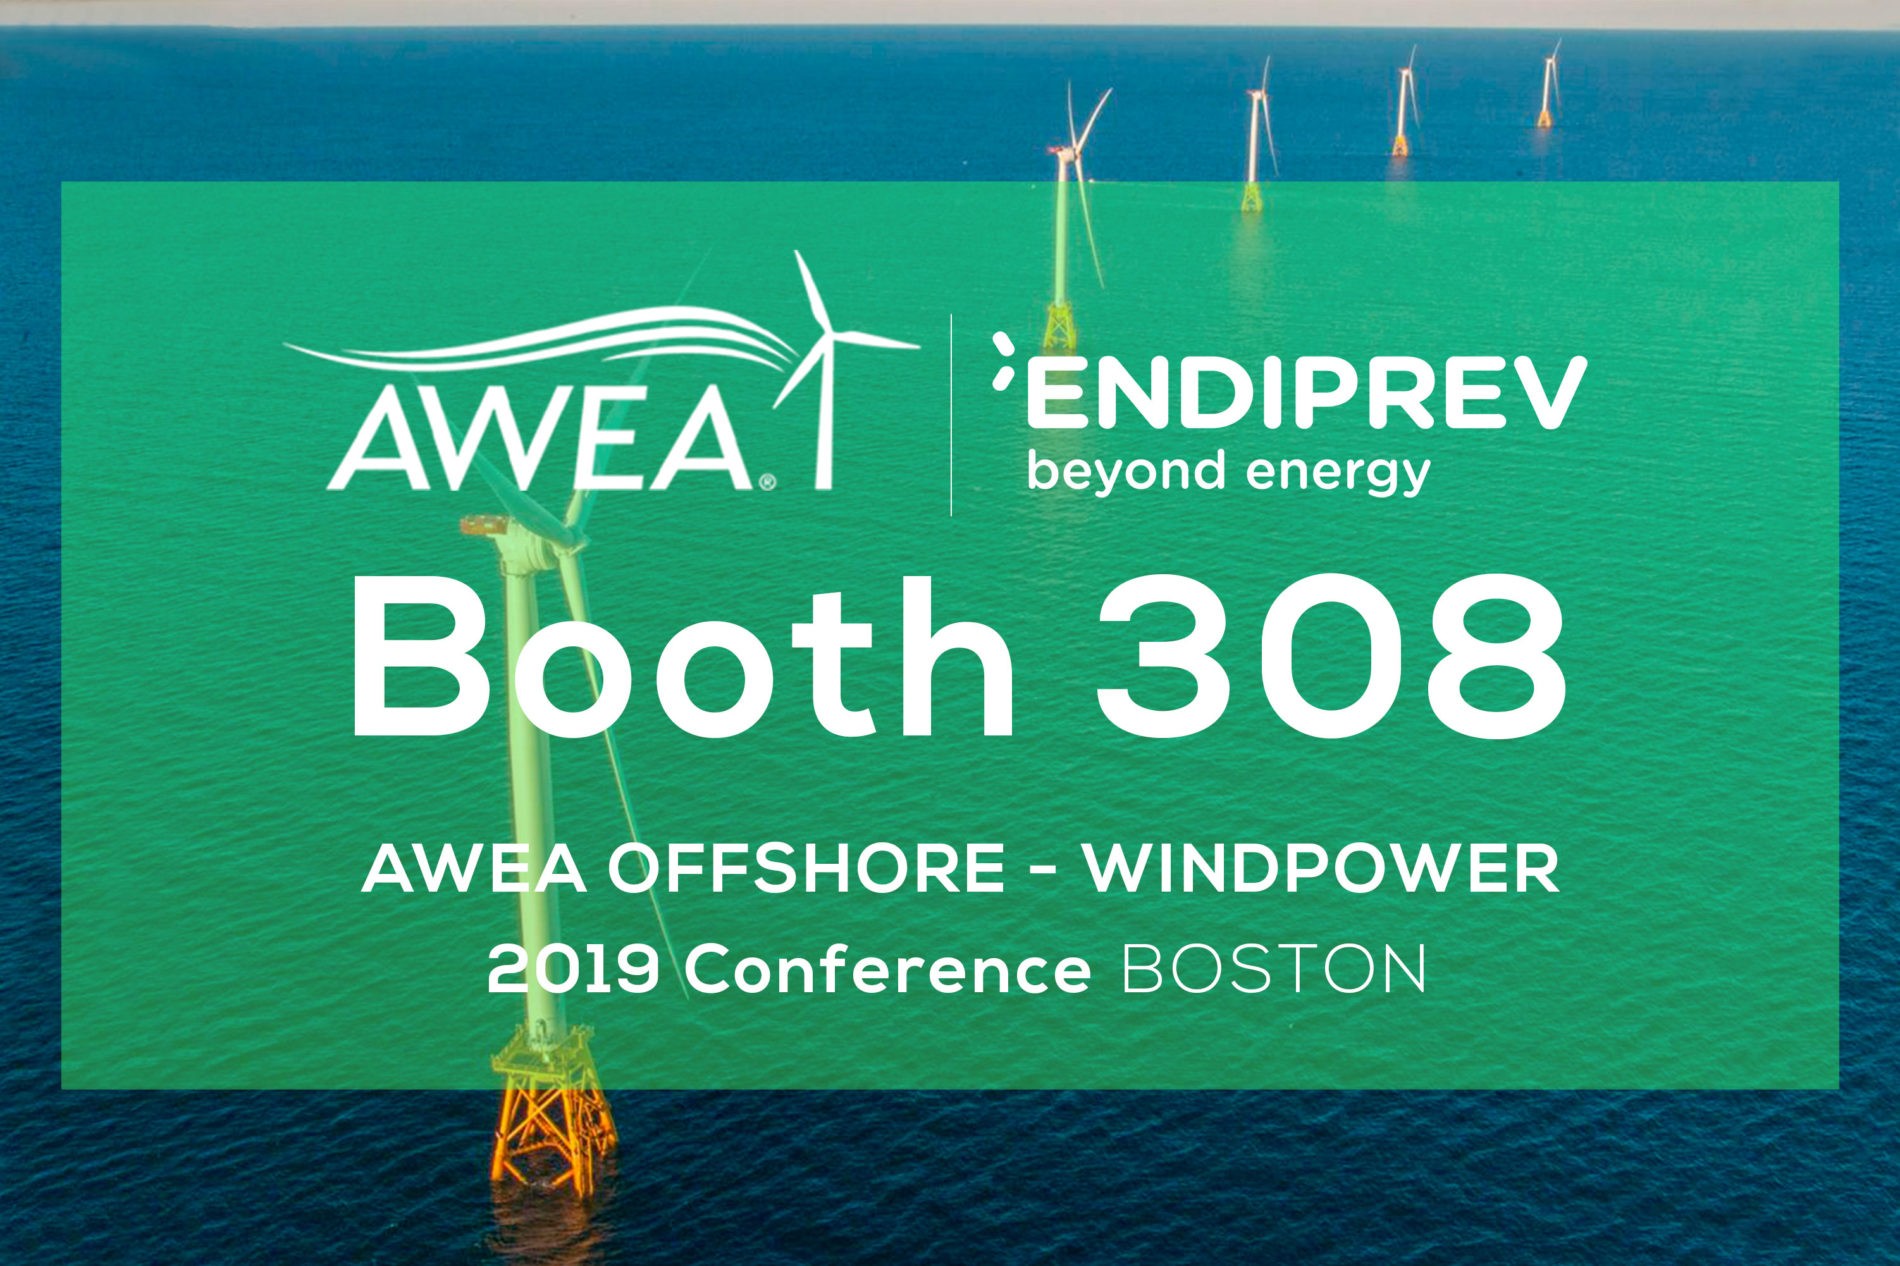 Endiprev at AWEA Offshore WINDPOWER 2019 Conference in Boston